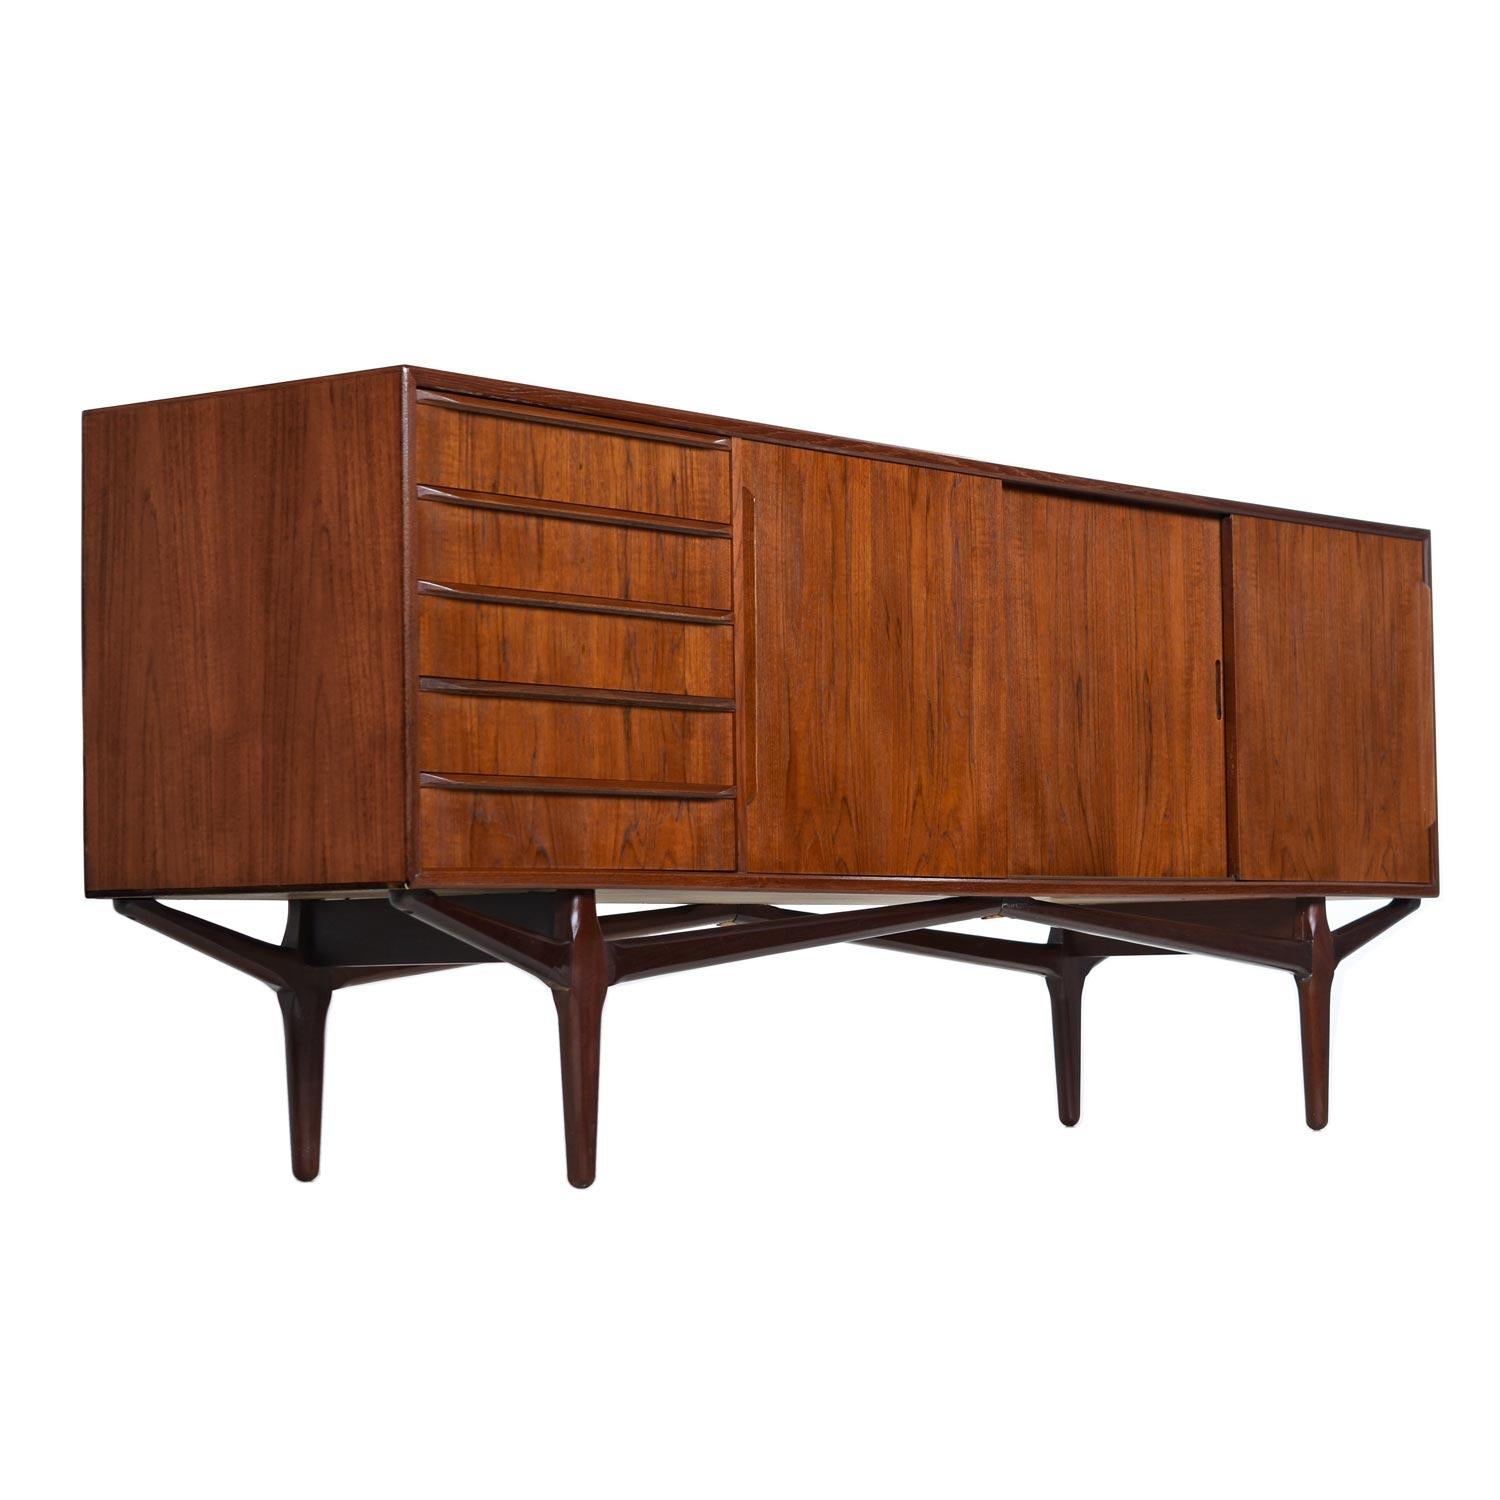 This is one of the most elegant Danish teak credenzas that we’ve had the pleasure to present. The deep, roasted cinnamon tone in the teak wood indicates and early vintage (late 1950s-early 1960s). A patina of such richness can only be garnered by